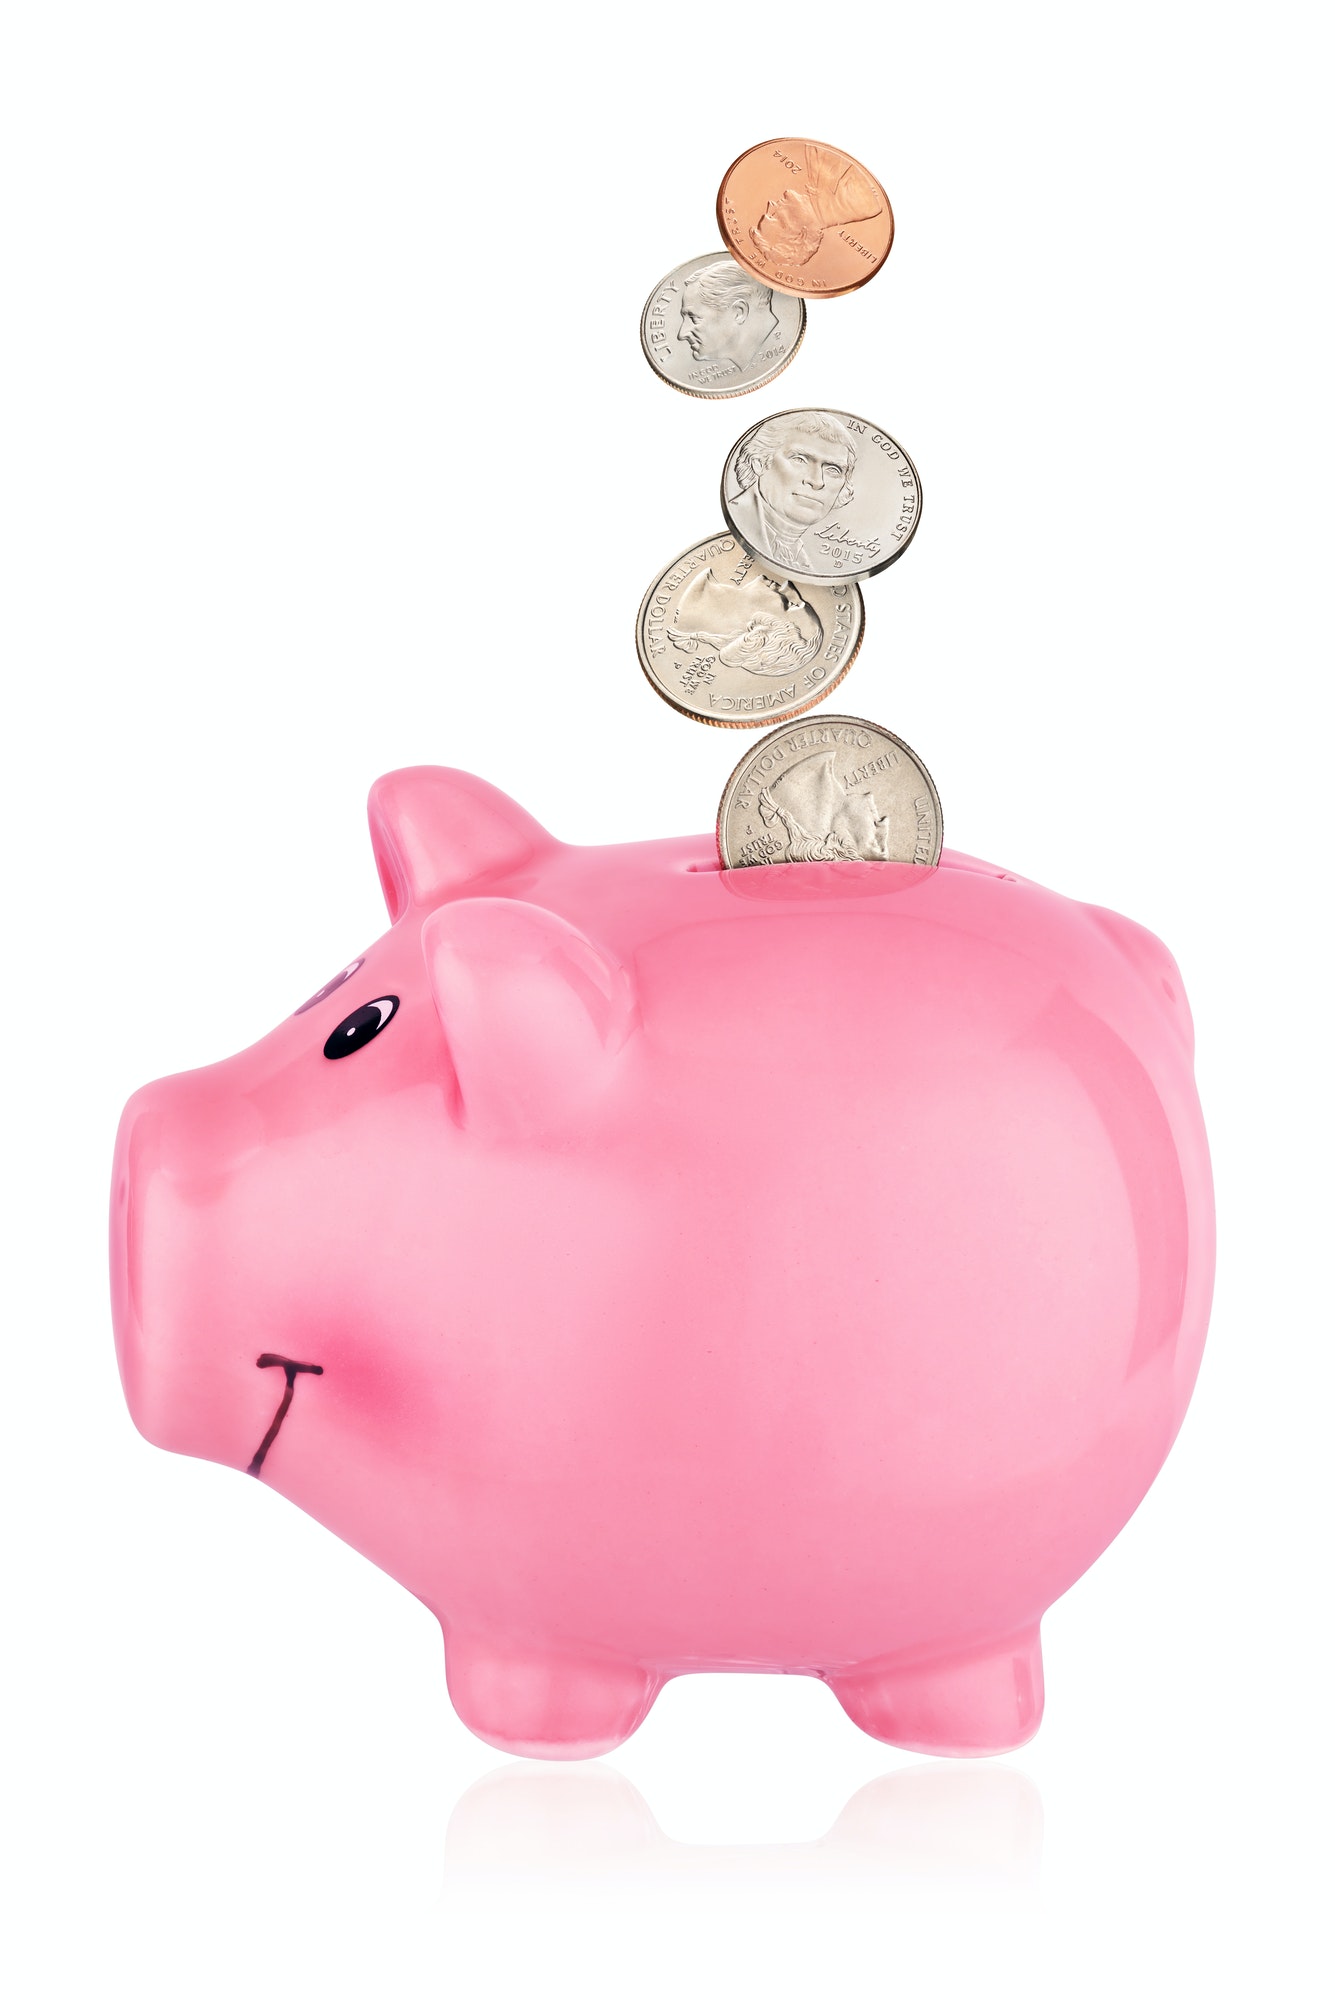 Pink piggy bank with falling coins isolated on white background